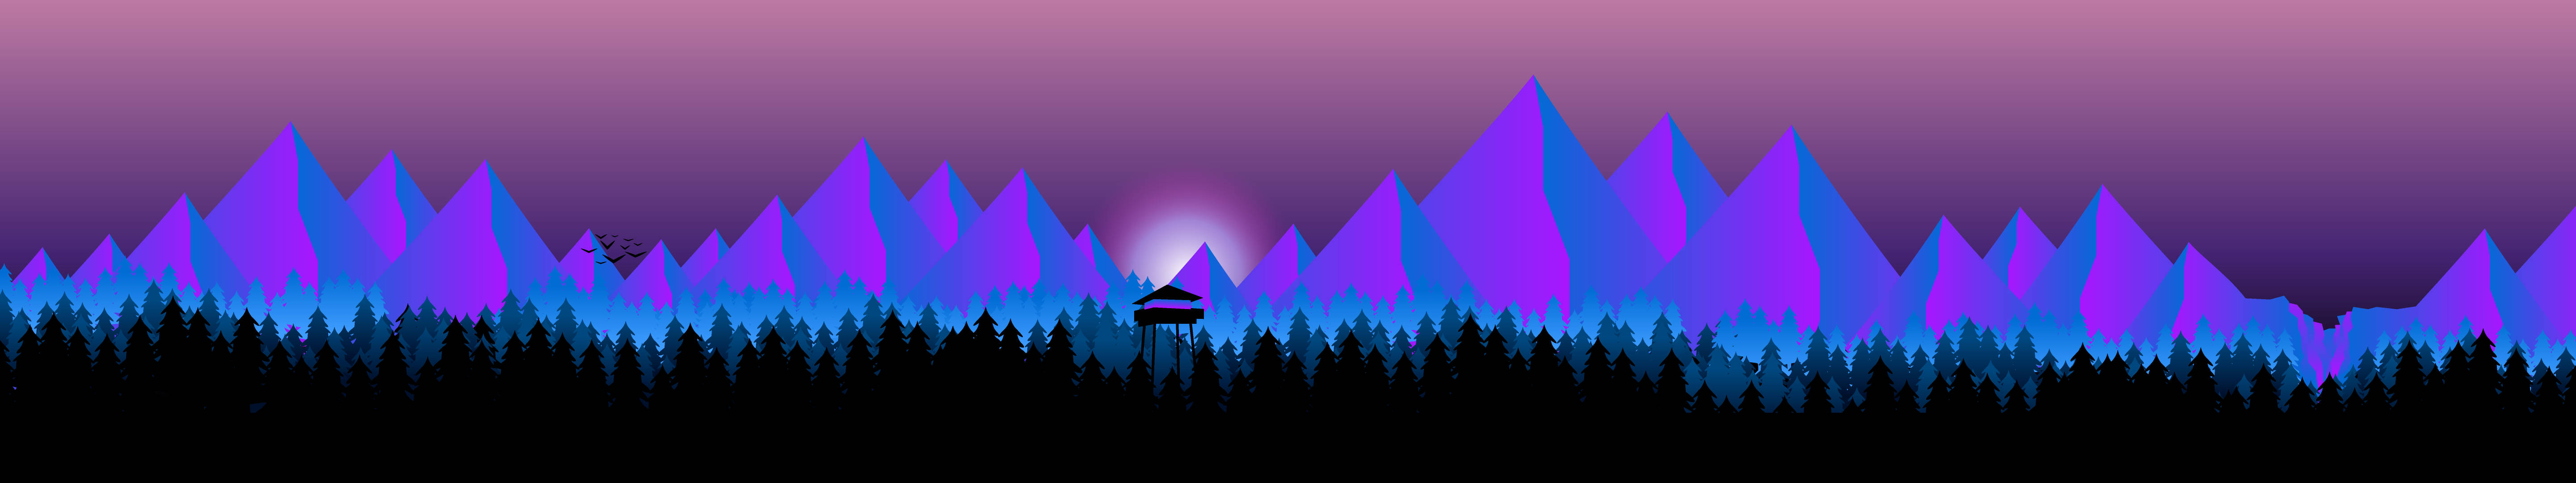 Purple Animated Forest Three Screen Wallpaper